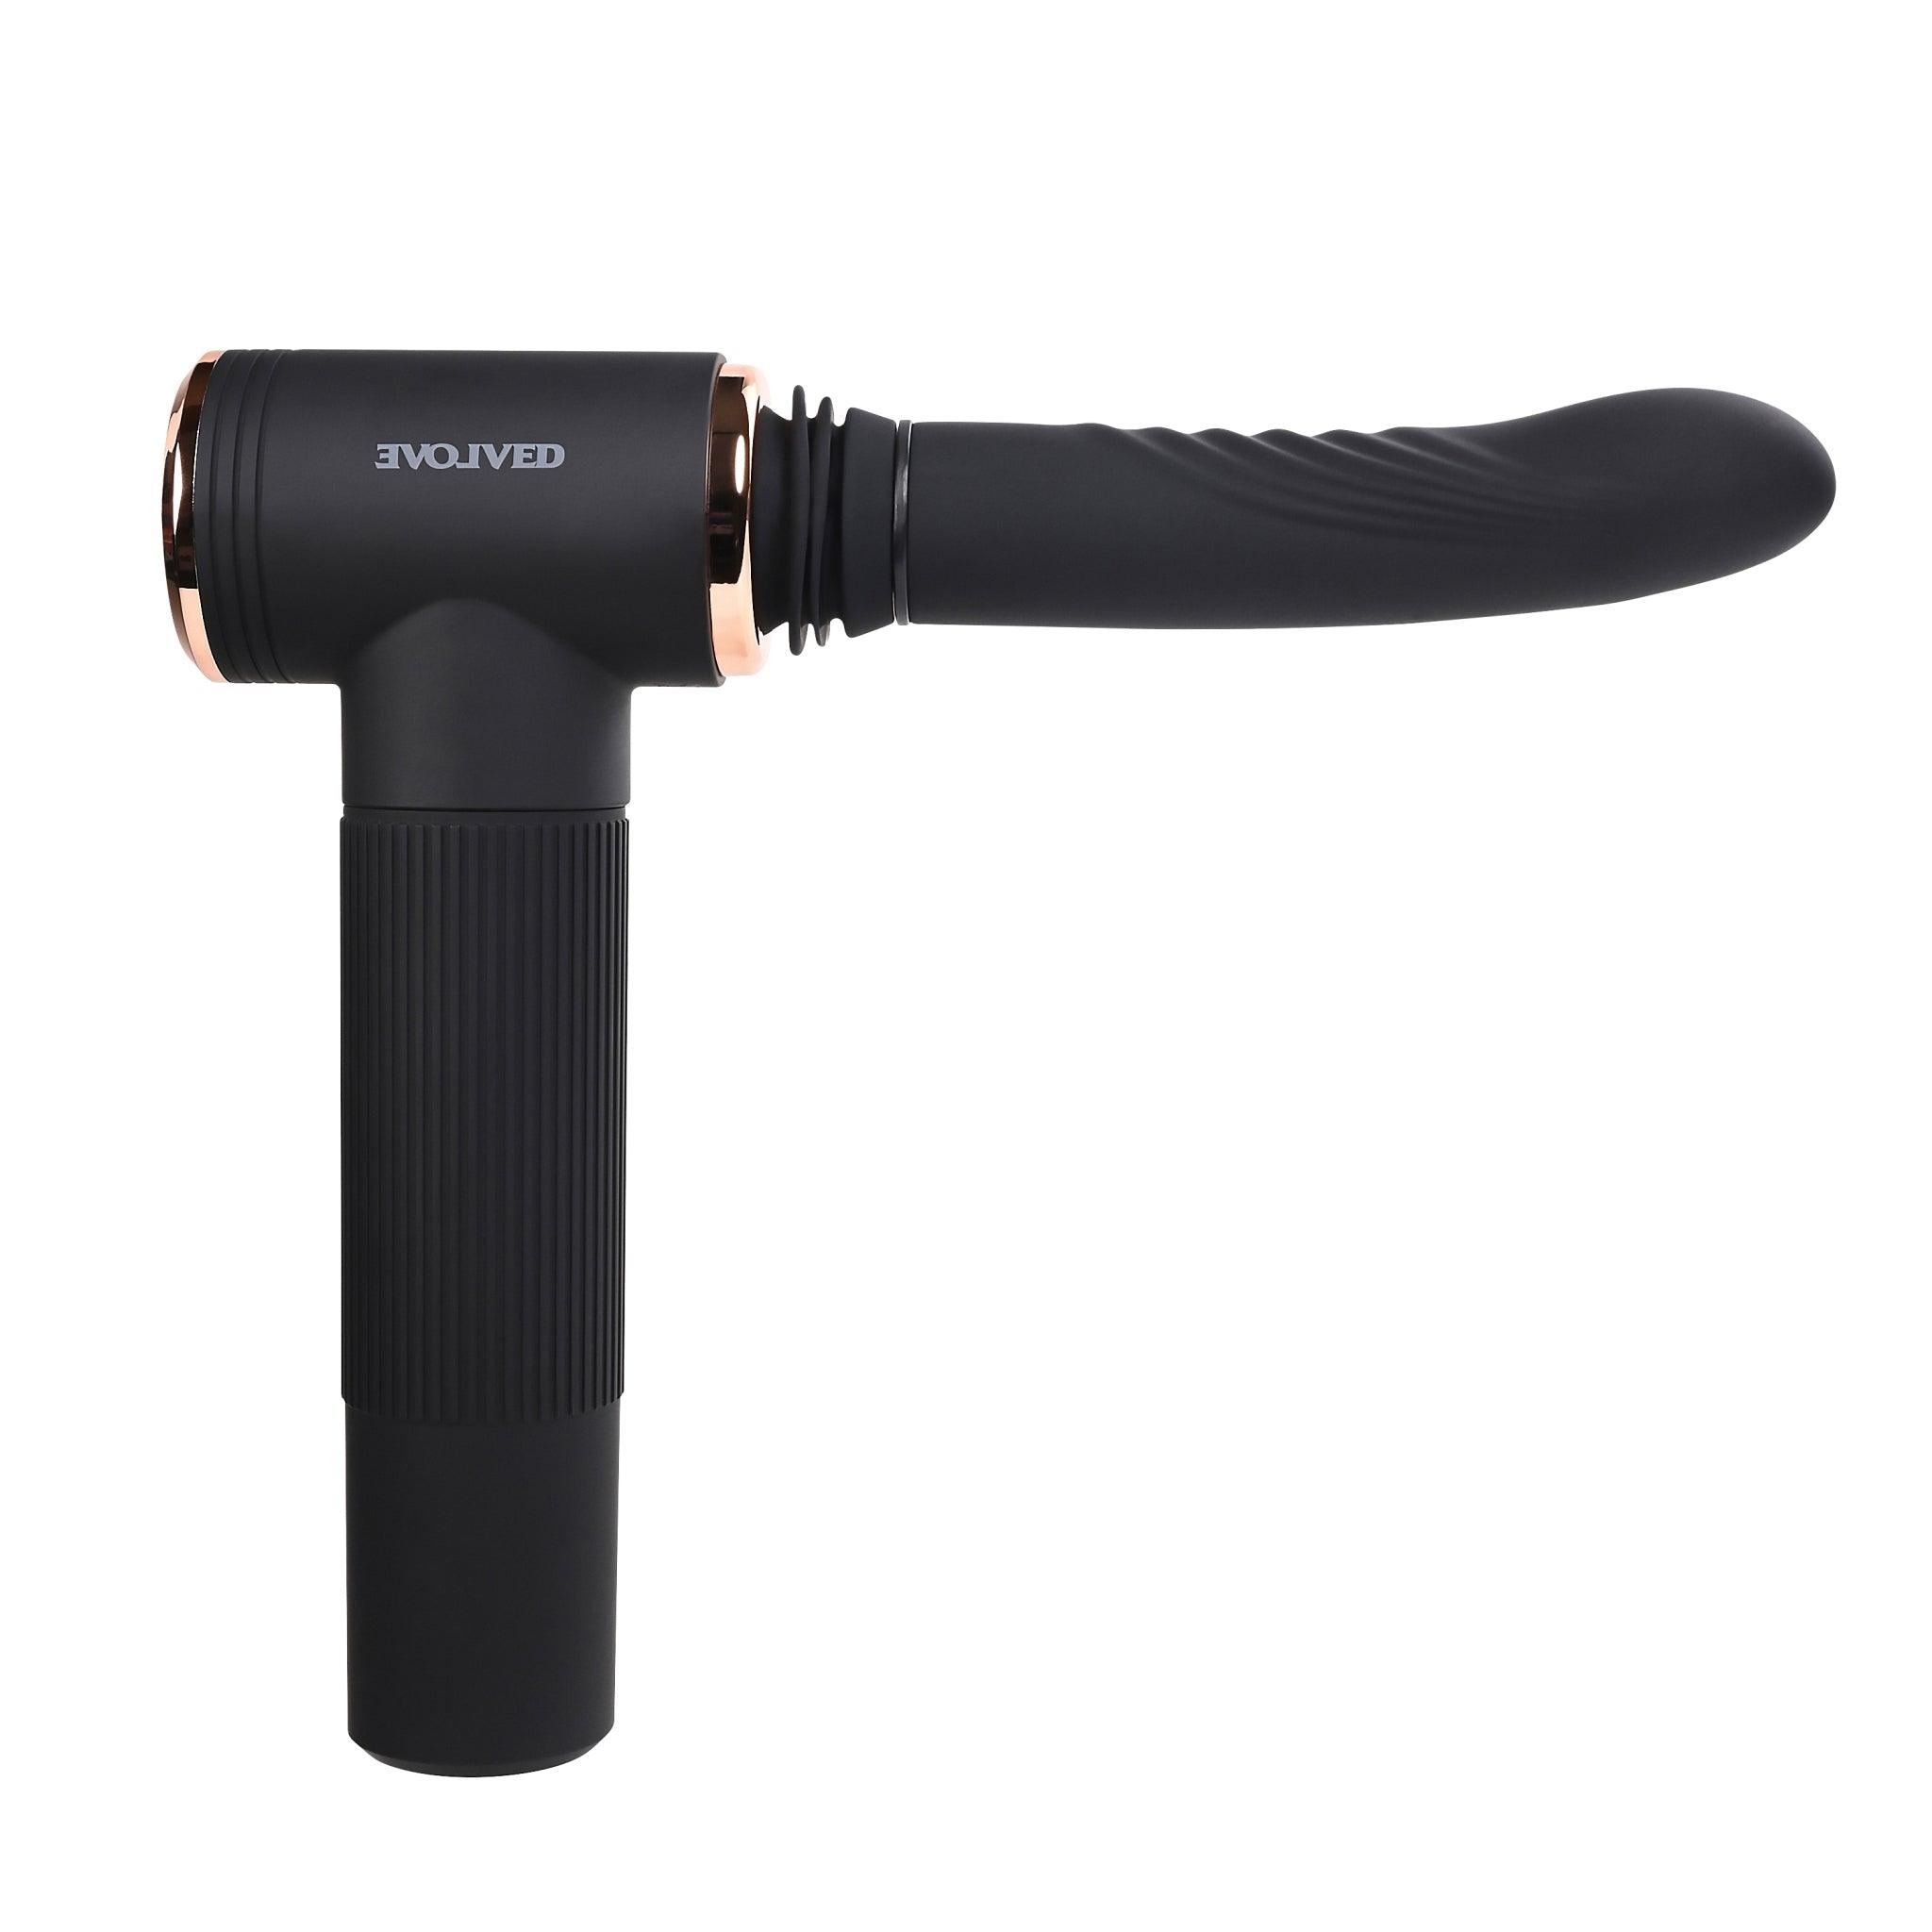 Evolved Too Hot To Handle - Handheld or Mountable Thrusting Machine - Rechargeable - CheapLubes.com